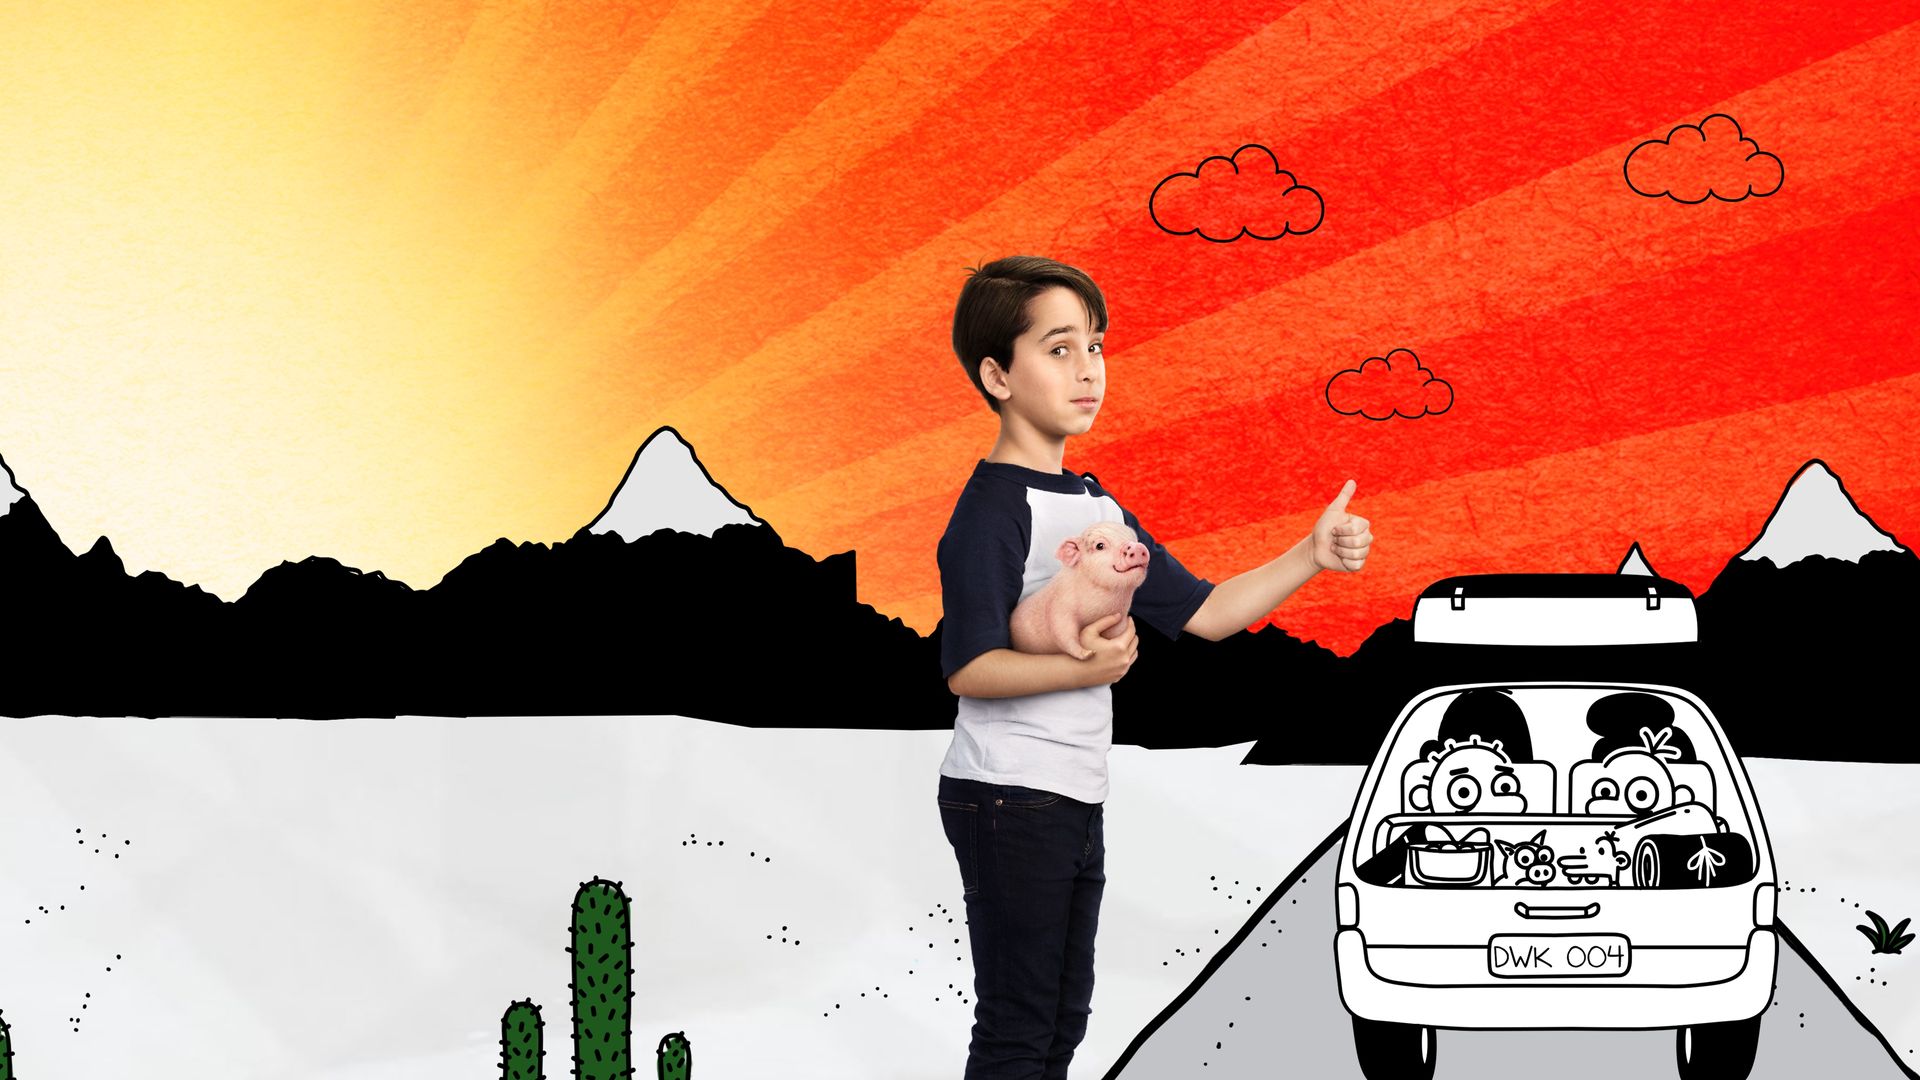 Diary of a Wimpy Kid: The Long Haul Backdrop